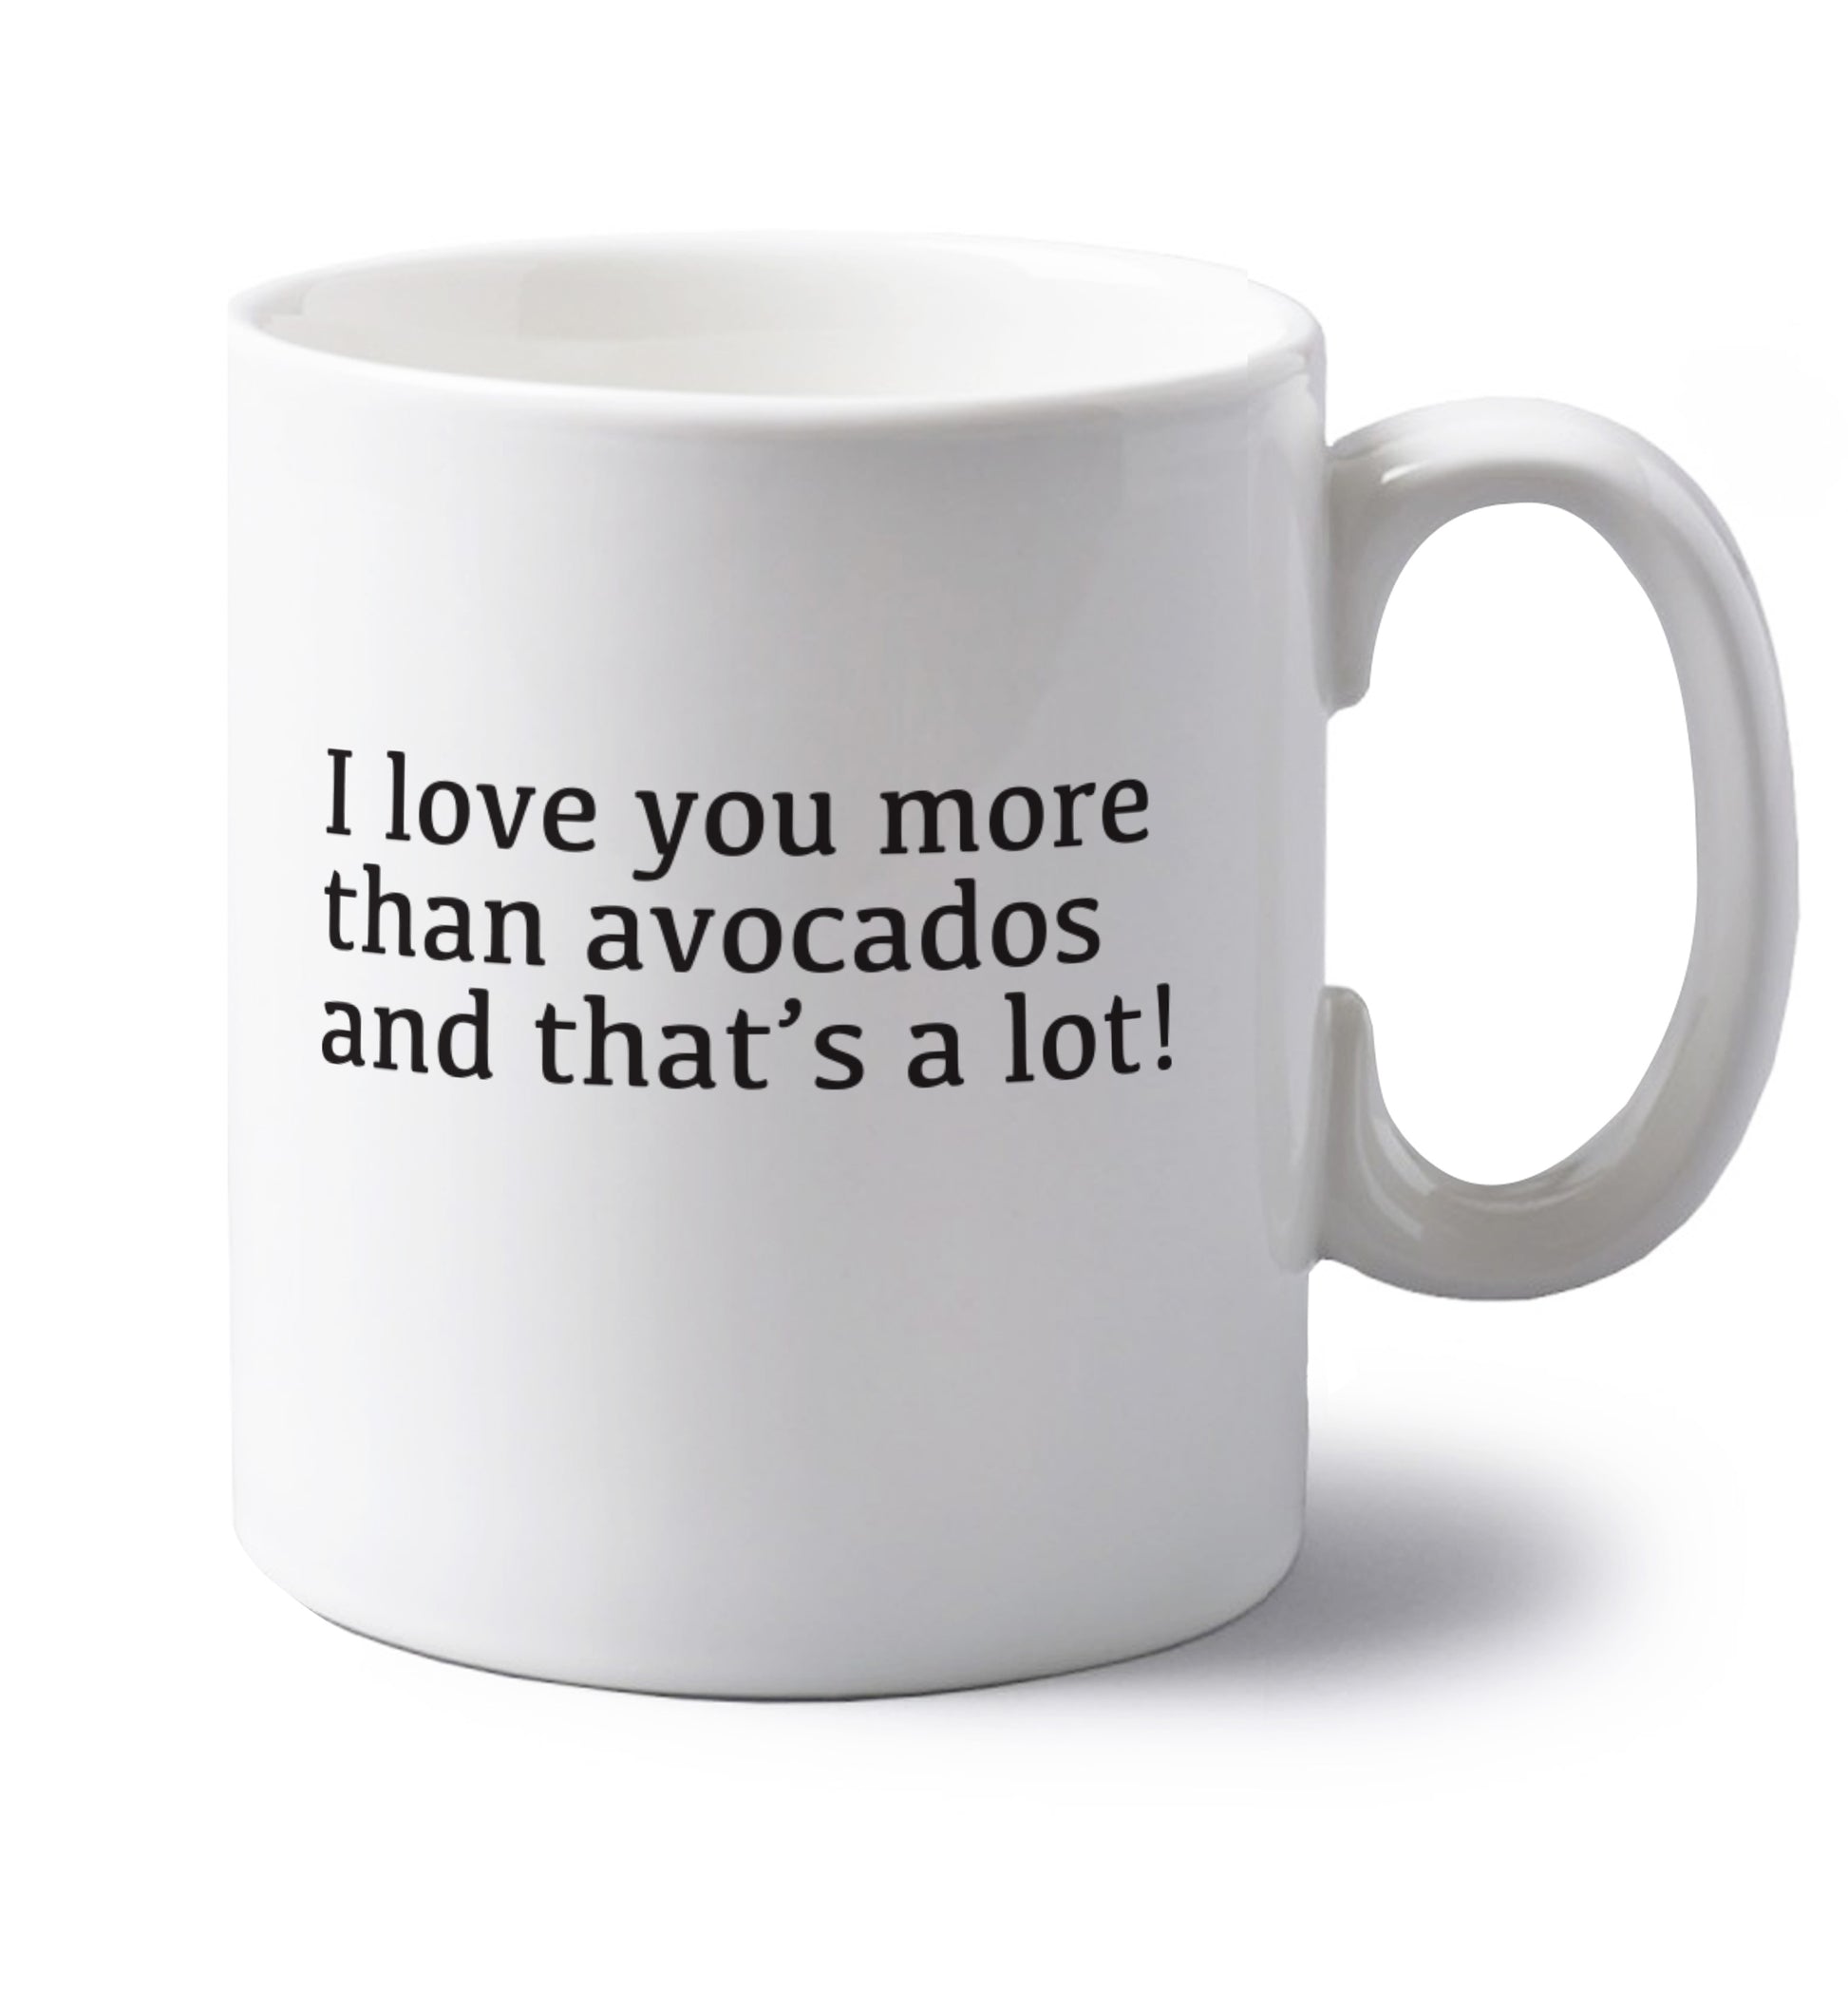 I love you more than avocados and that's a lot left handed white ceramic mug 